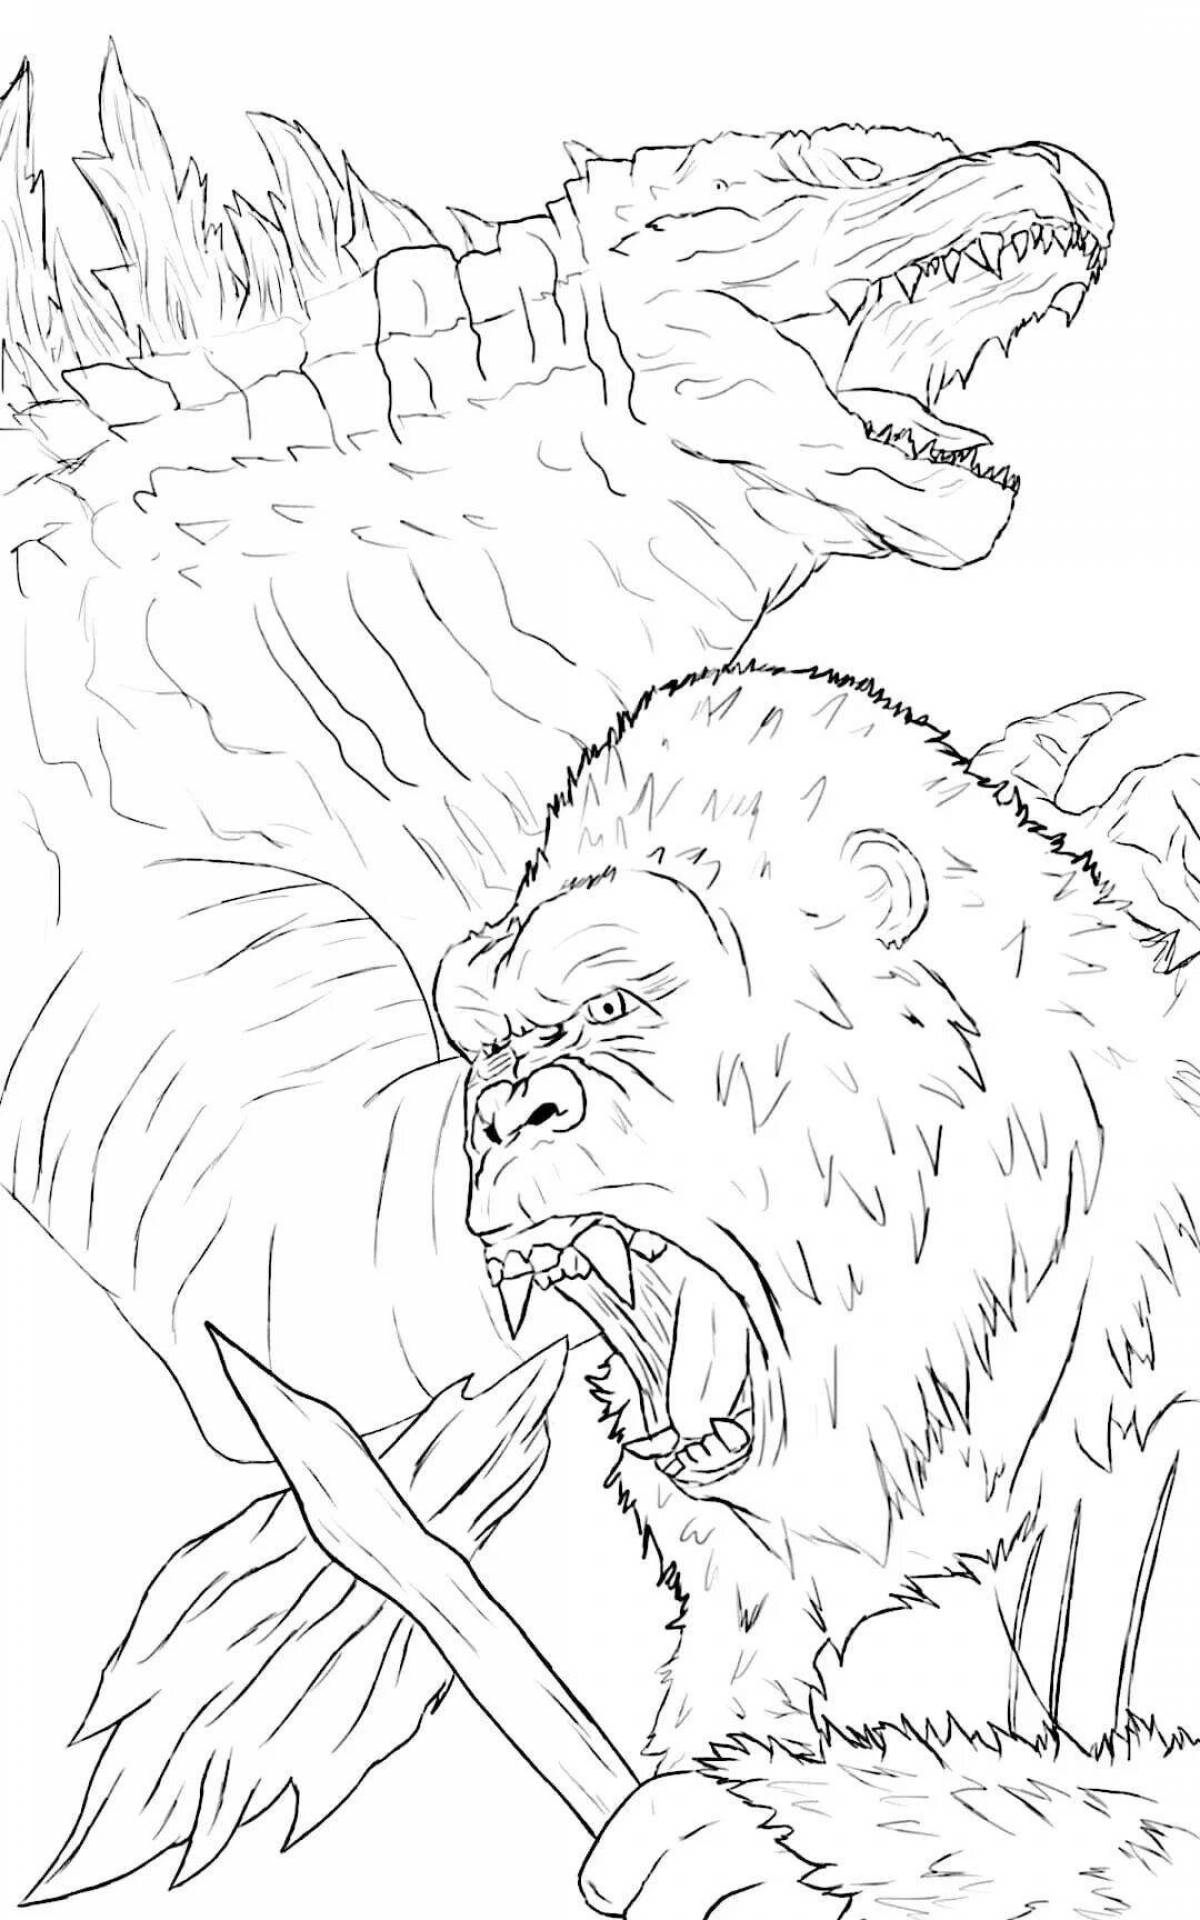 Outstanding king kong coloring book for kids